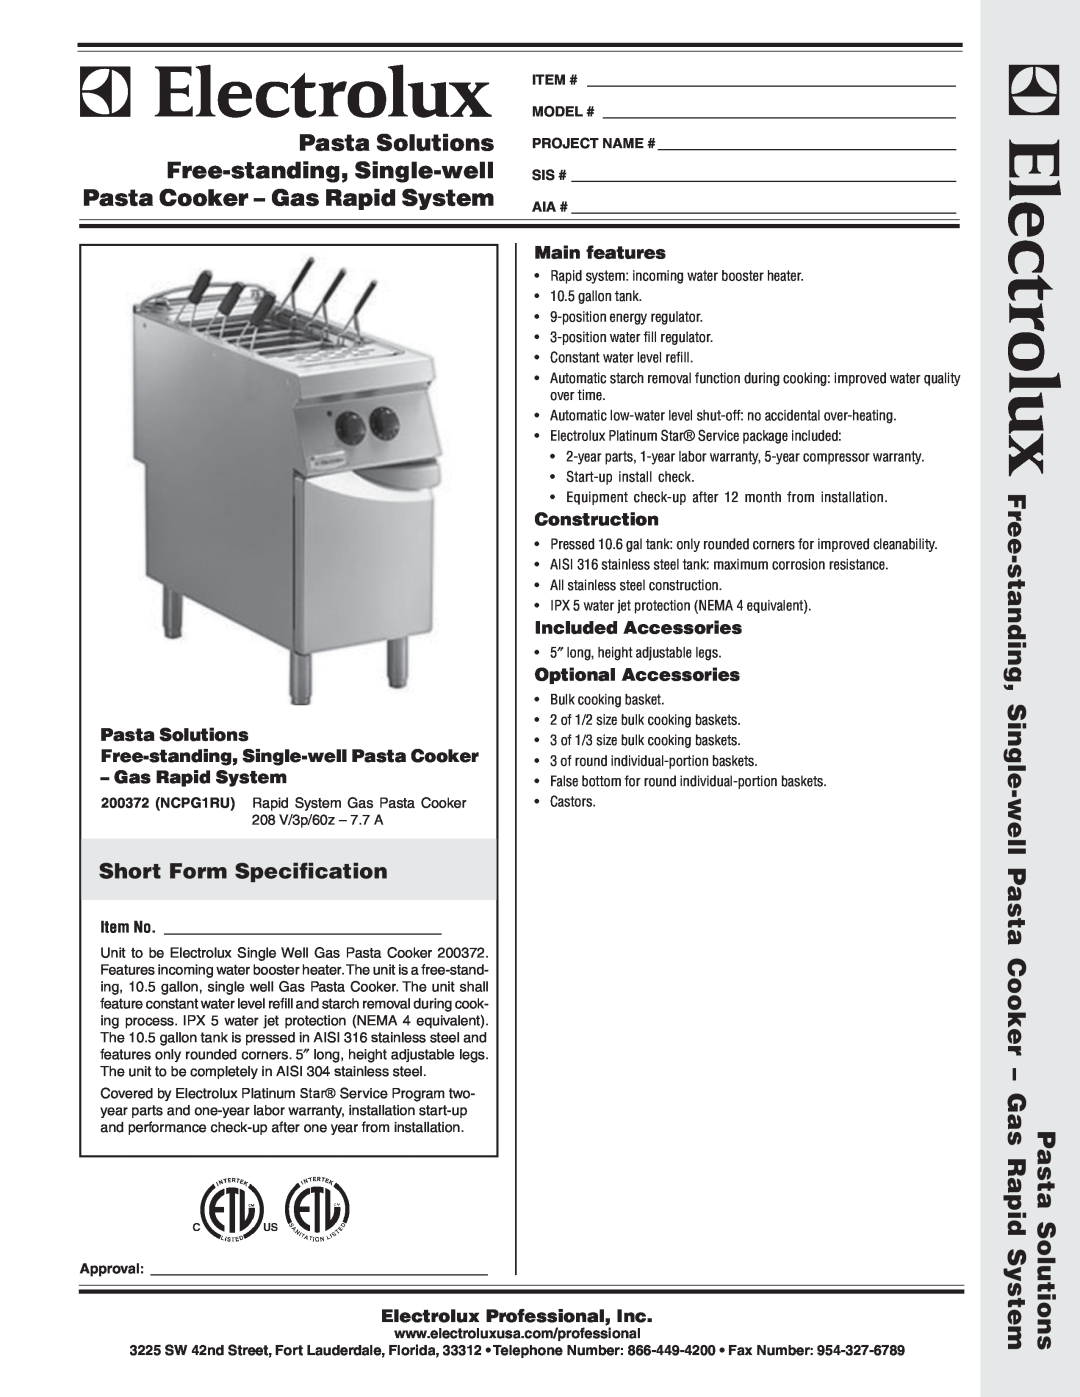 Electrolux NCPG1RU warranty Short Form Specification, Solutions System, Pasta Solutions, Gas Rapid System, Main features 